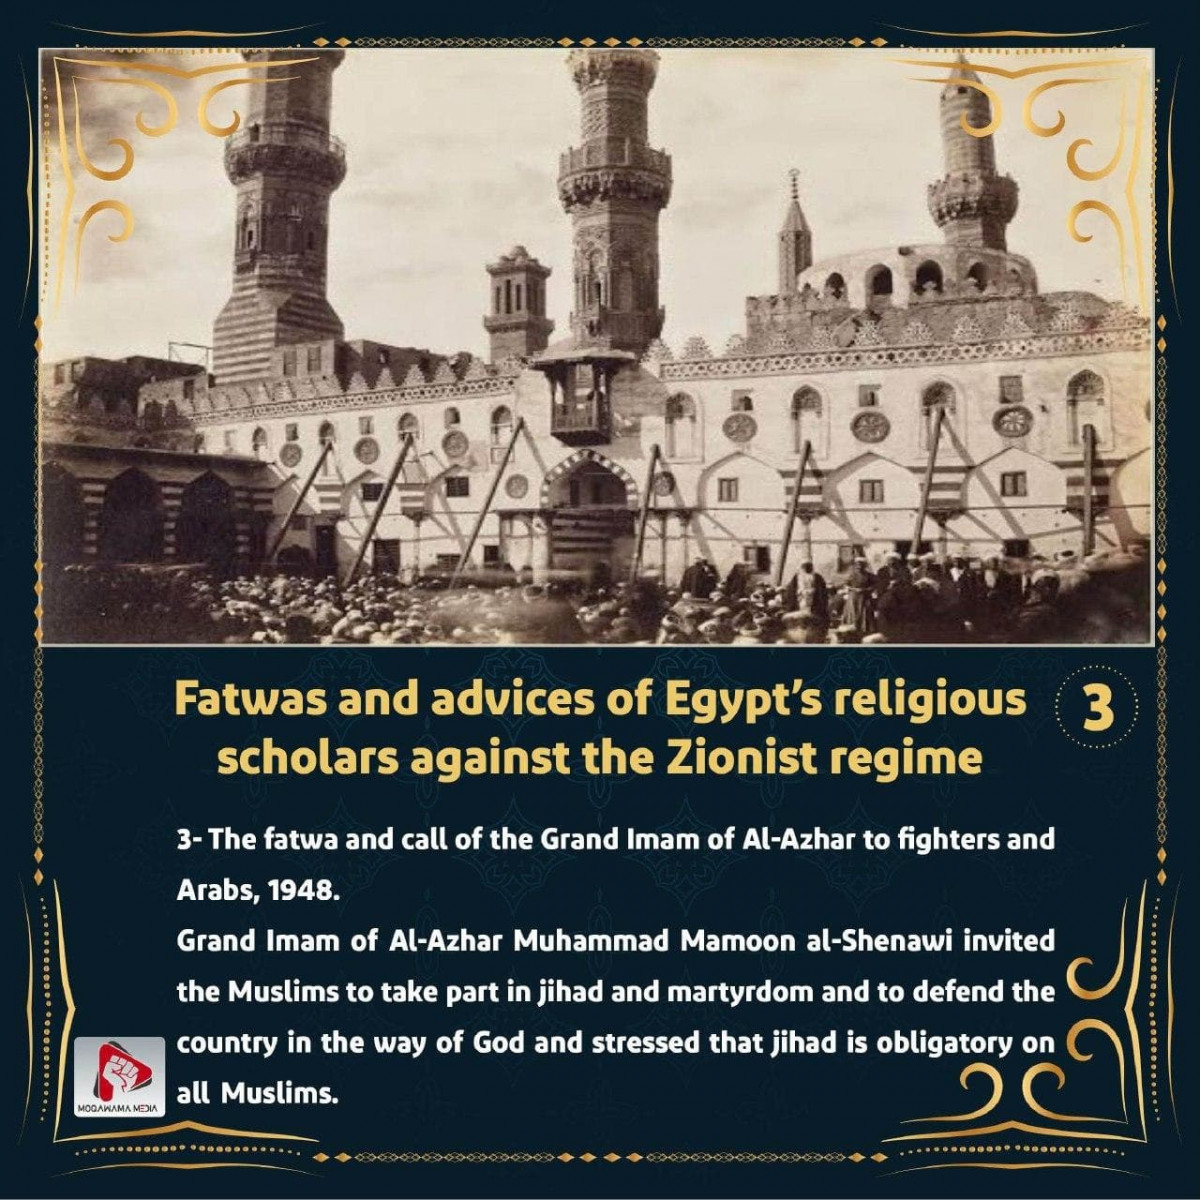 Fatwas and advices of Egypt's religious scholars against the Zionist regime 3